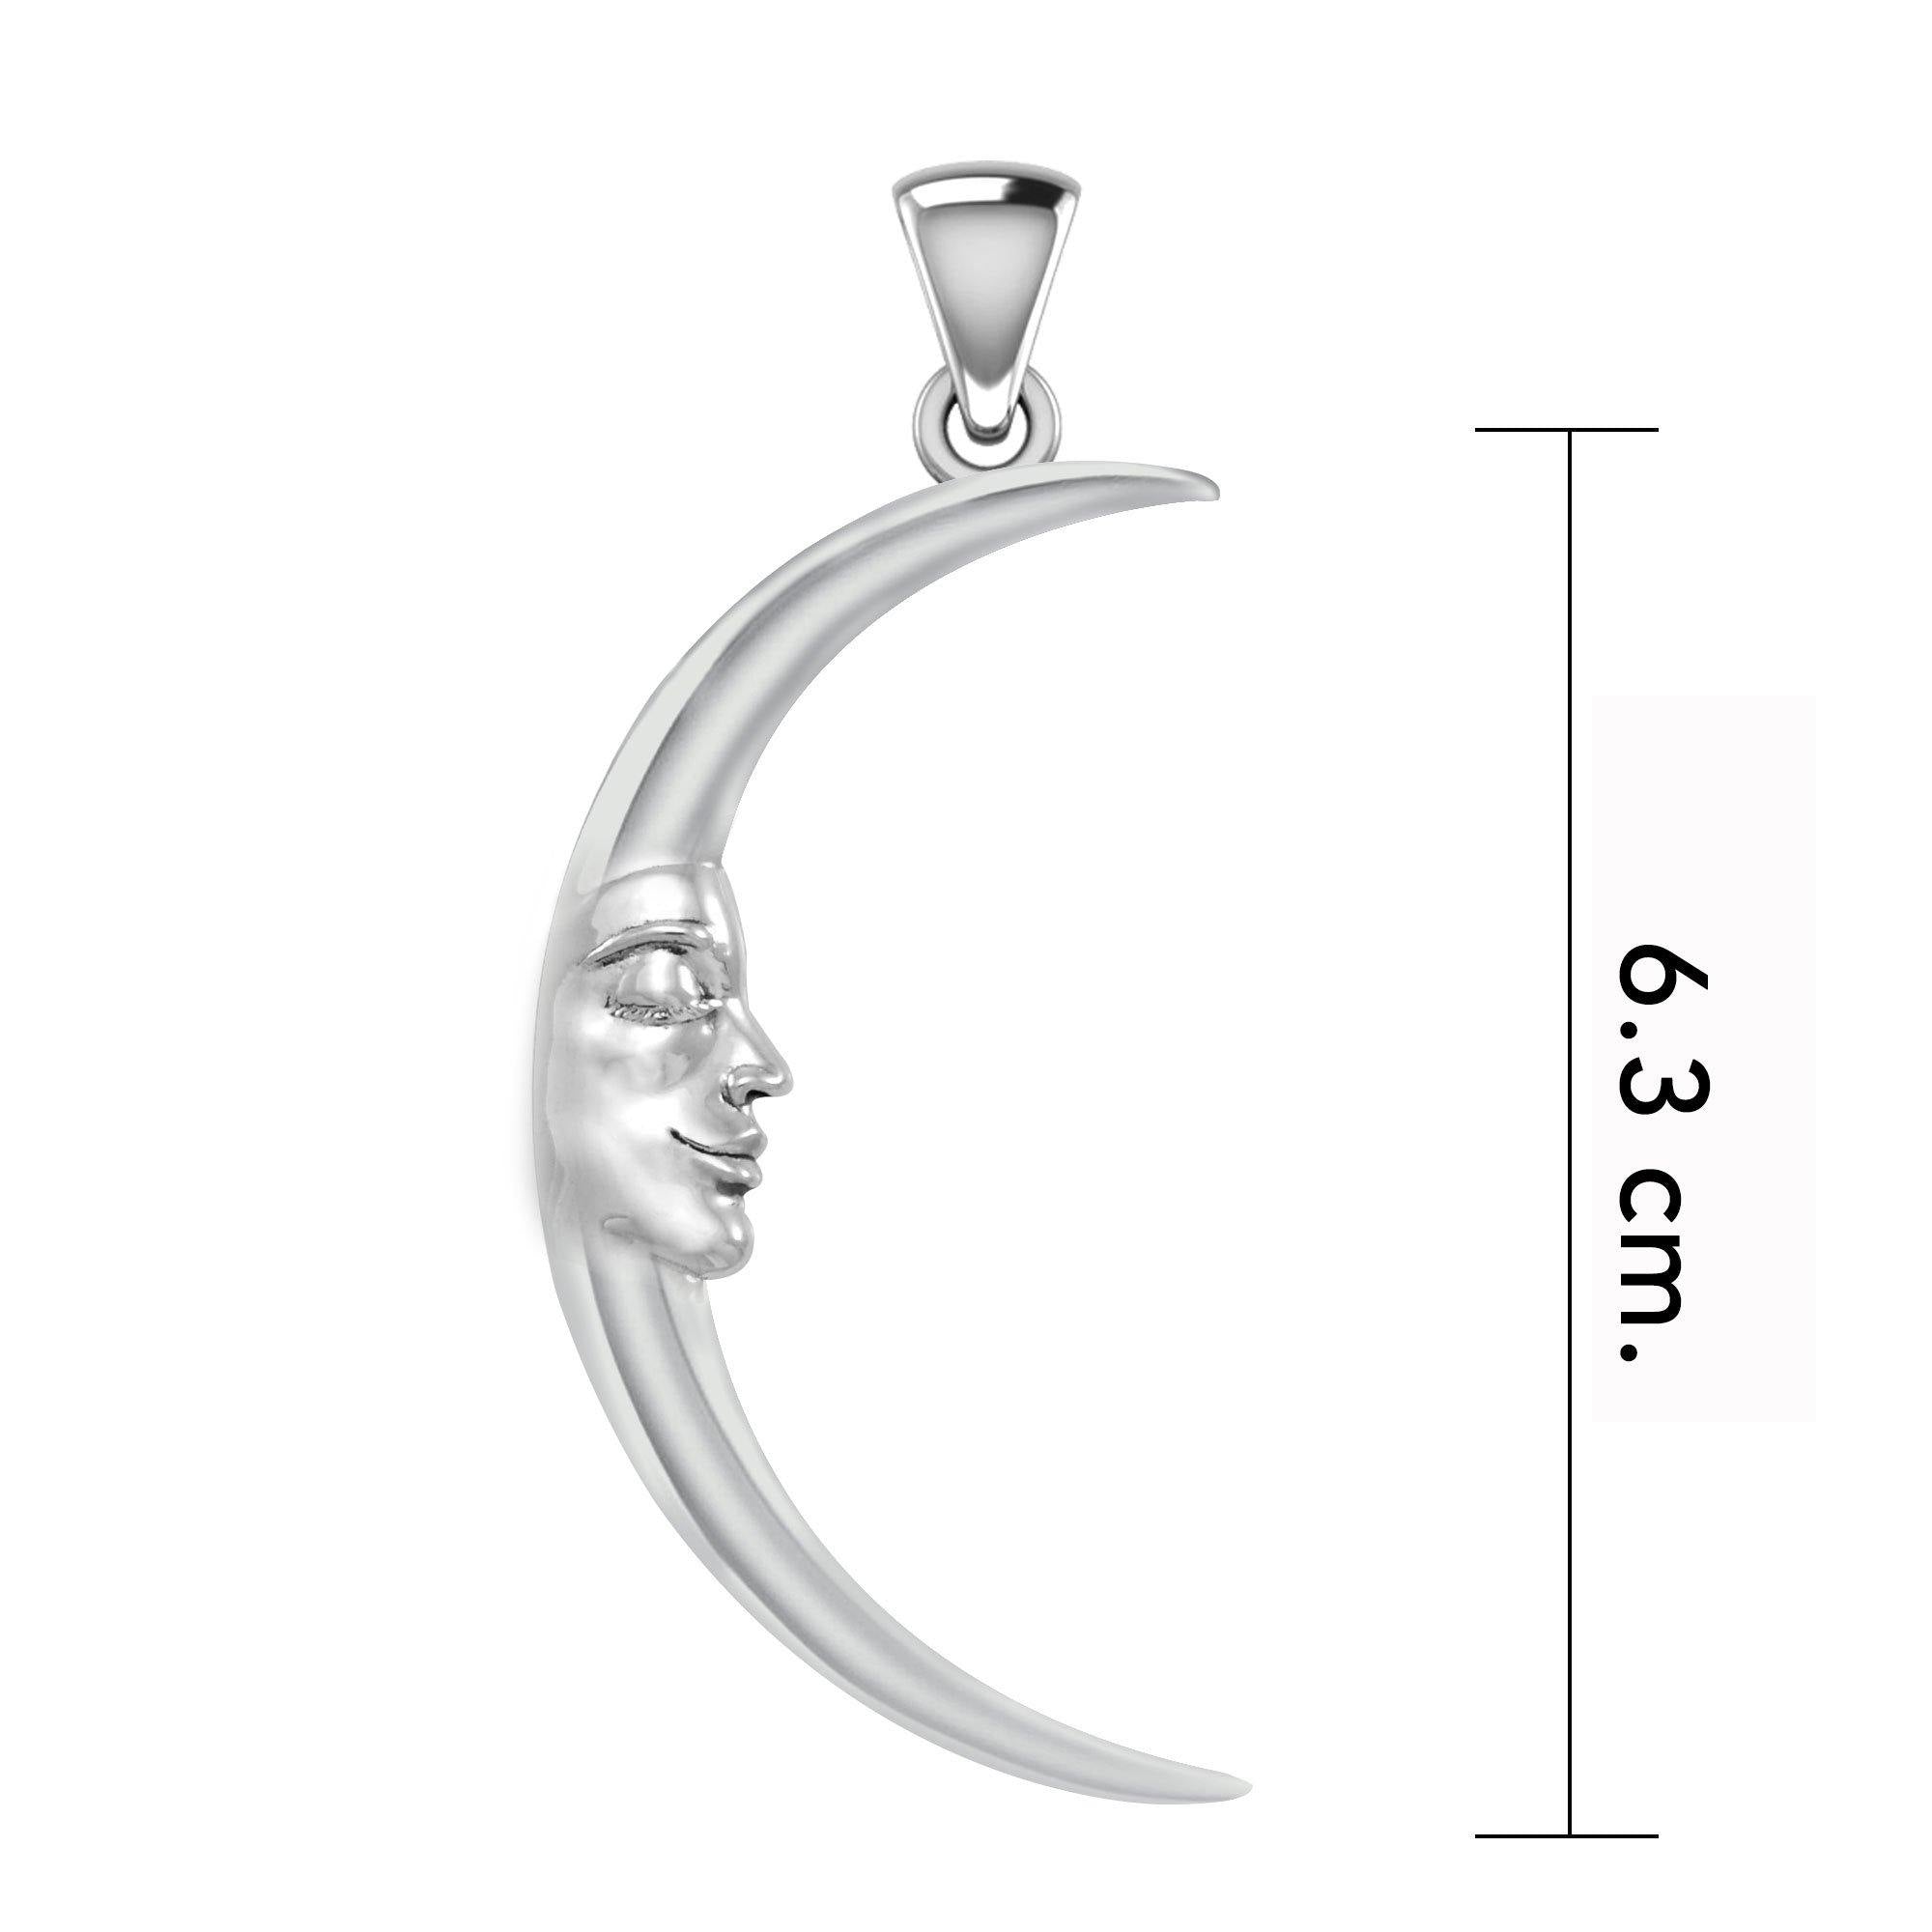 Double Sided Large Crescent Moon Silver Pendant TPD5633 - Jewelry